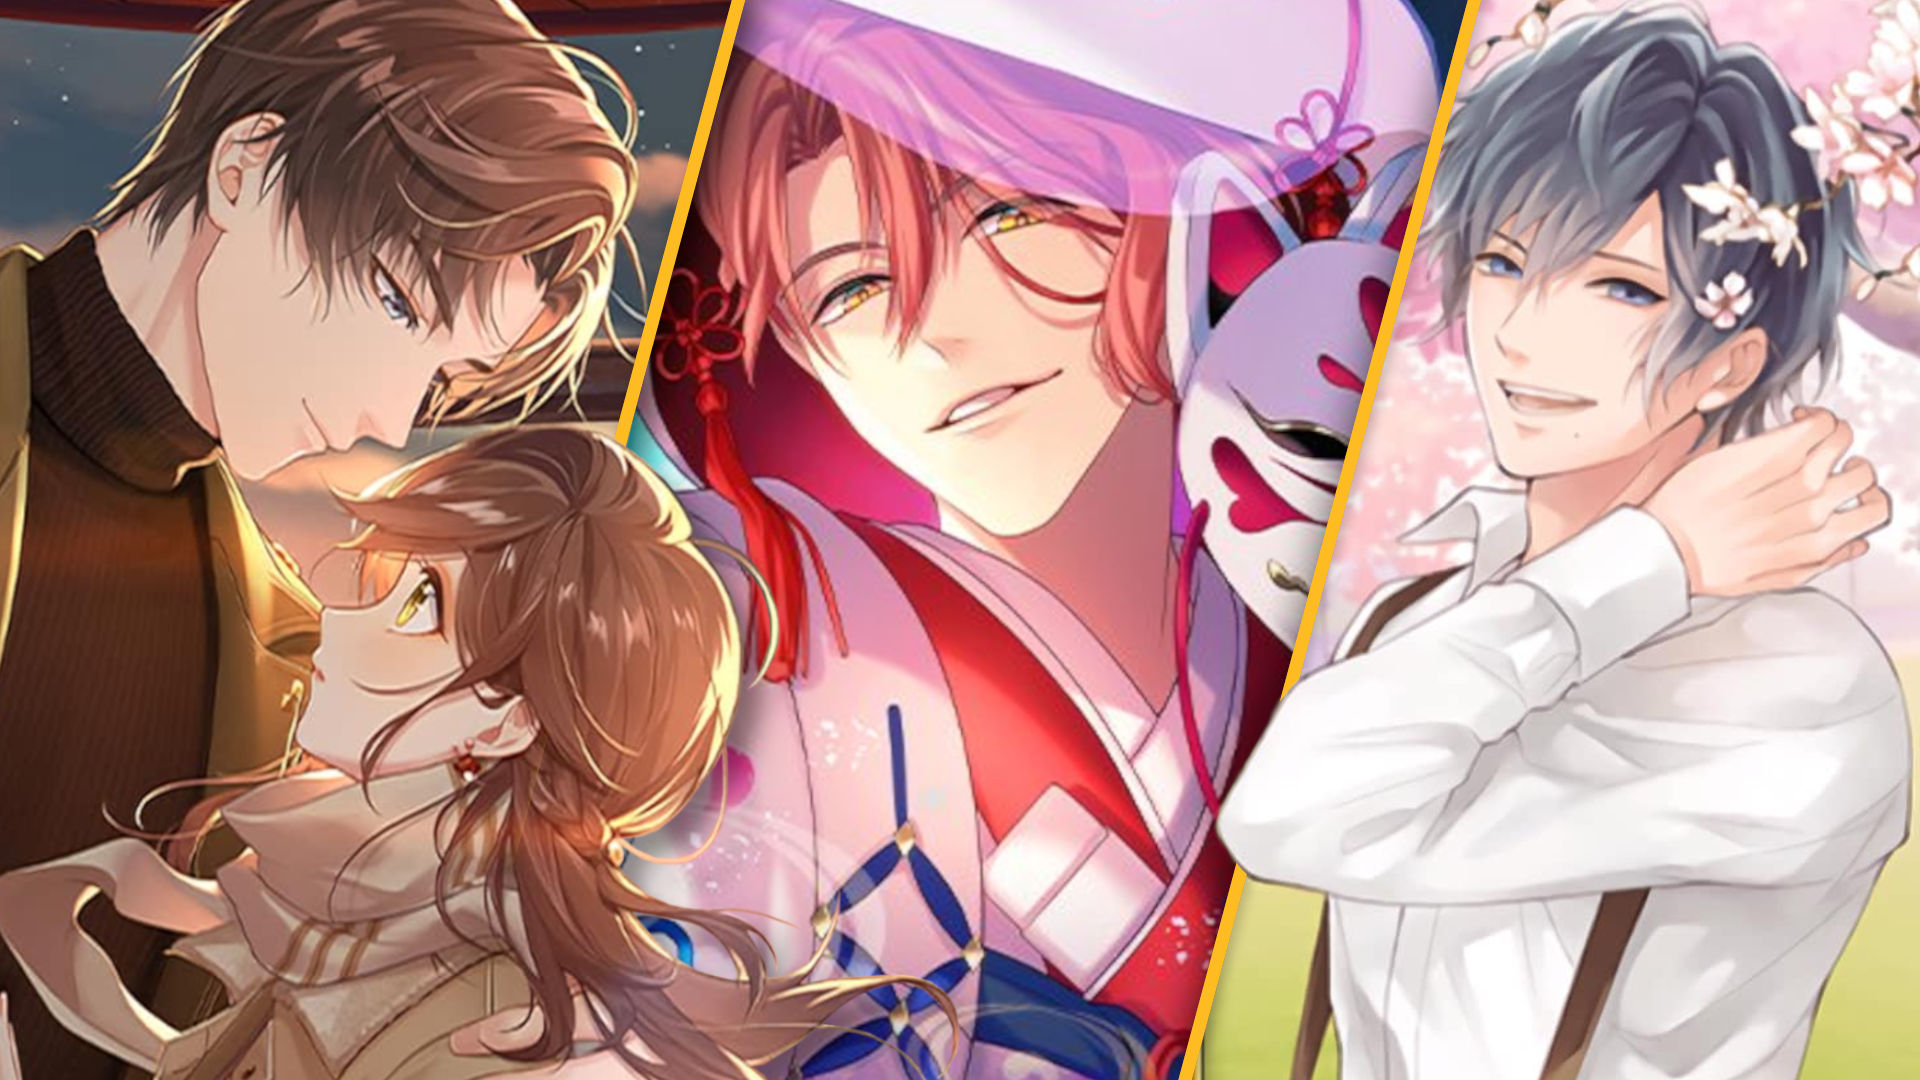 Obey Me! Anime Otome Sim Game - Apps on Google Play